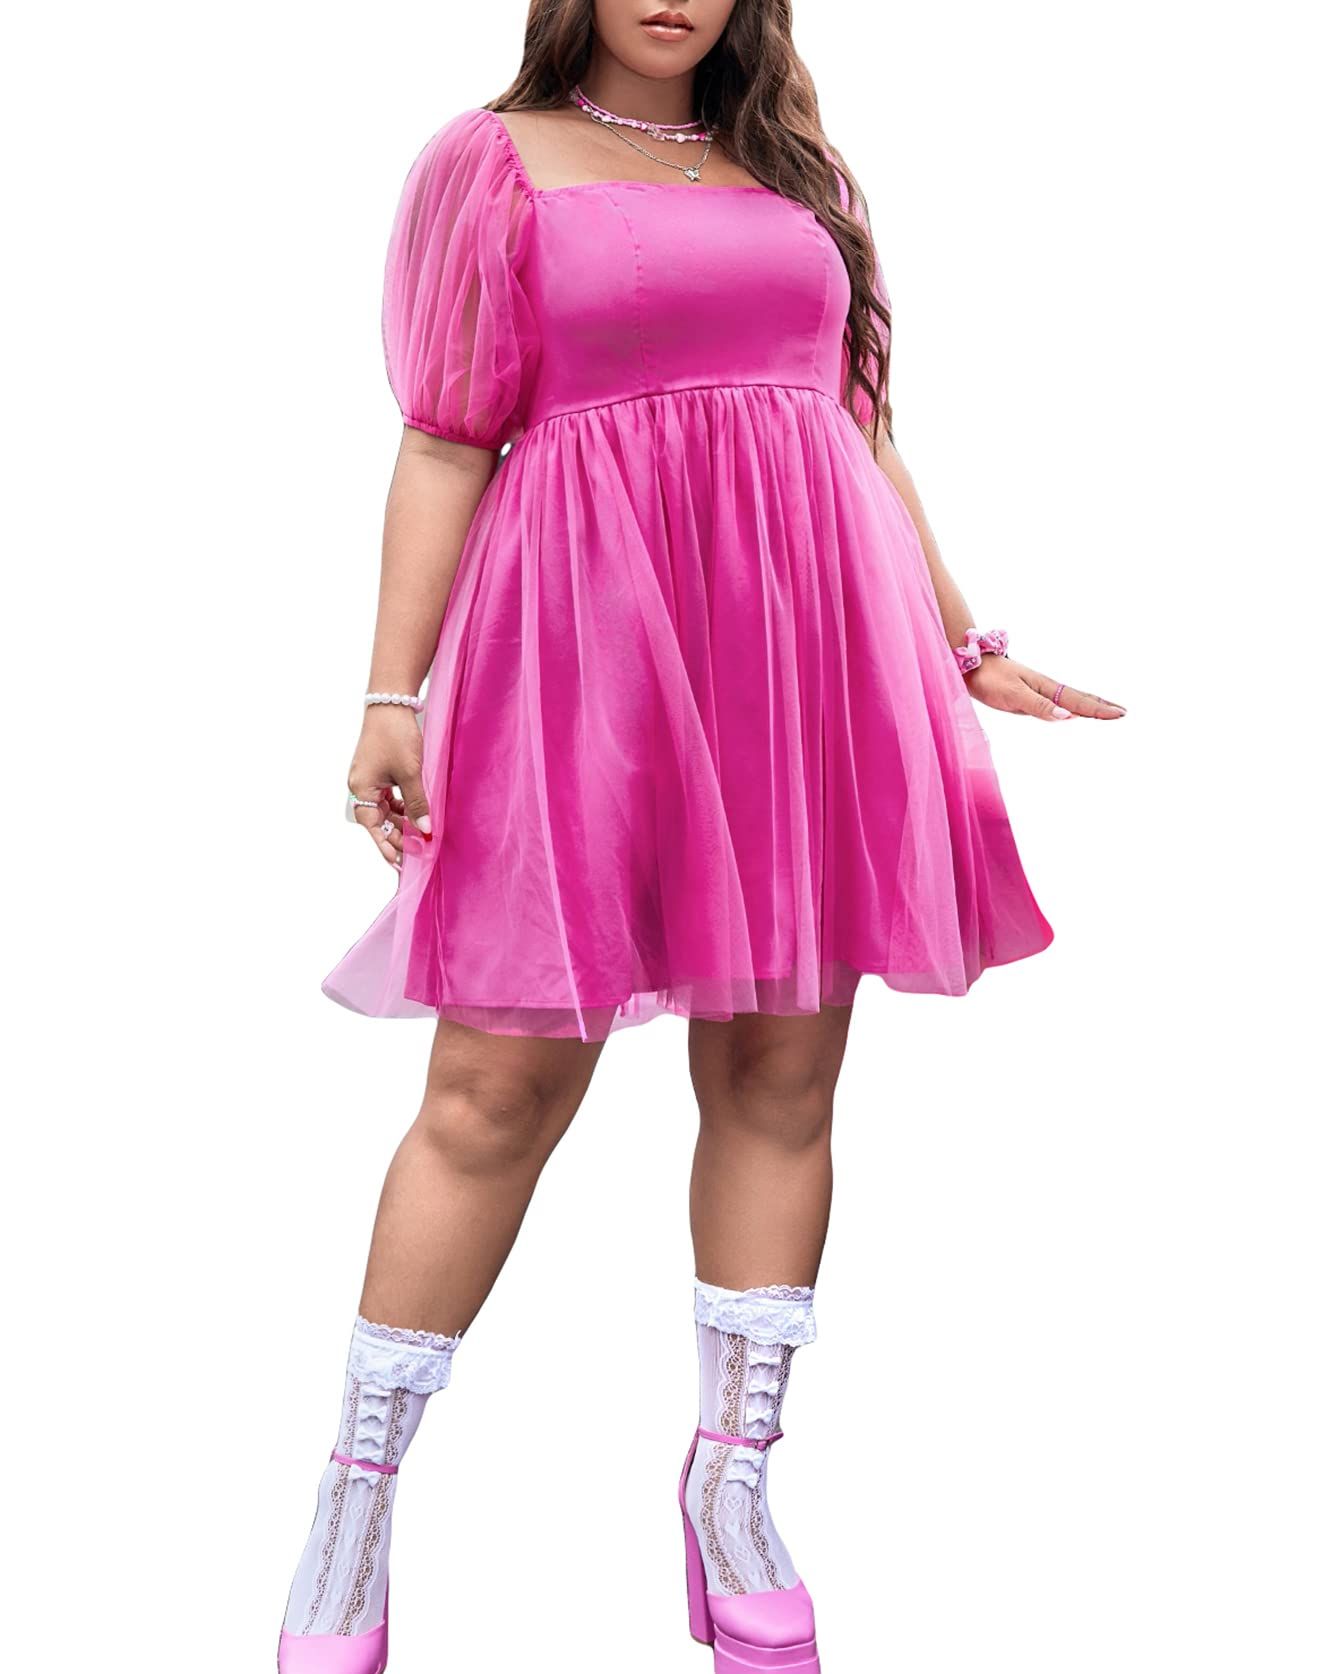 plus size homemade costume ideas for women